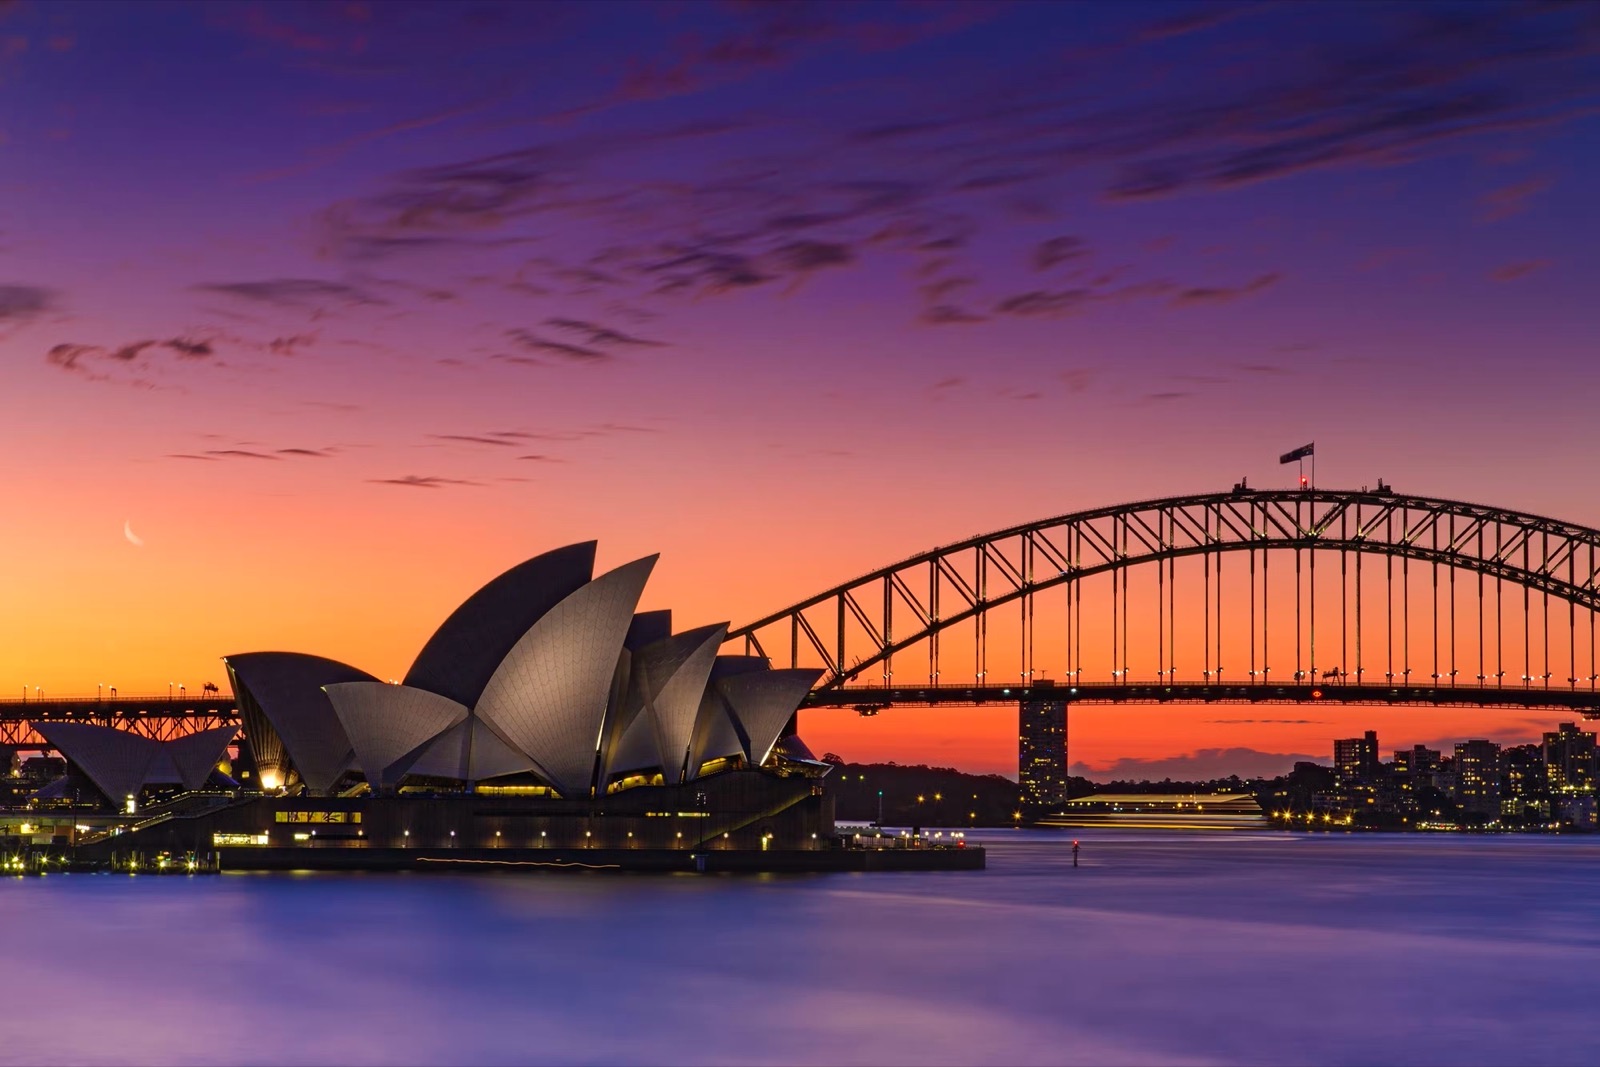 Create a Travel Bucket List ✈️ to Determine What Fantasy World You Are Most Suited for Sydney Opera House, Australia